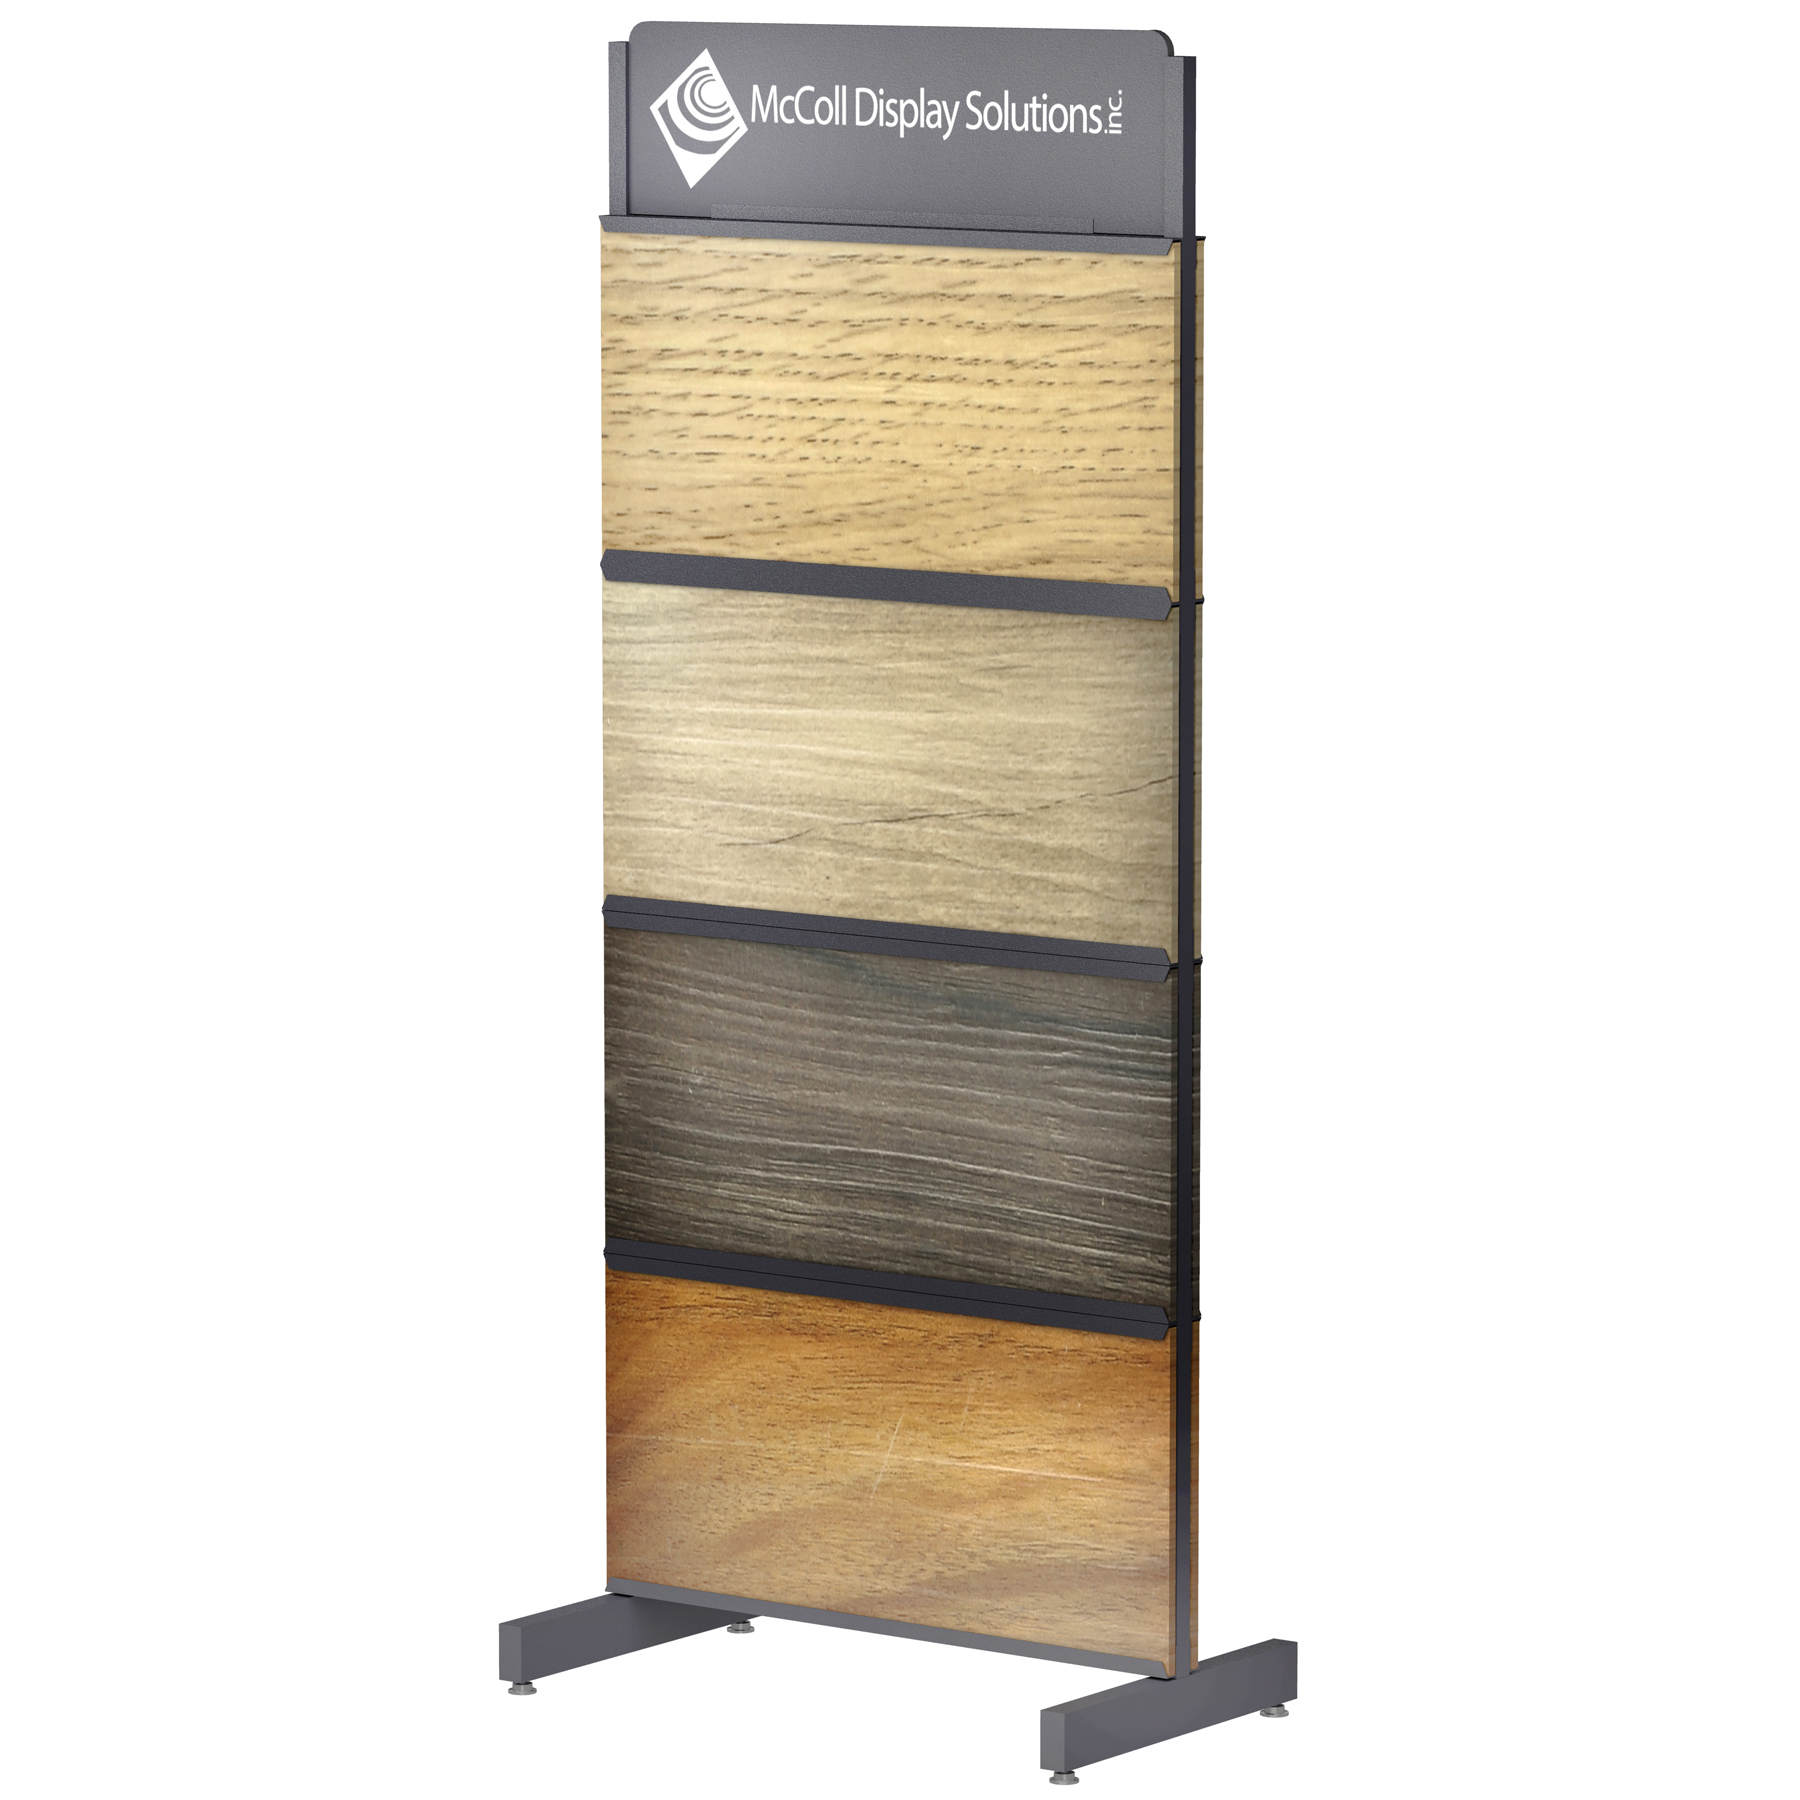 CD14 Tower Hardwood Laminate Plank Channel System Showroom Display with Company Logo